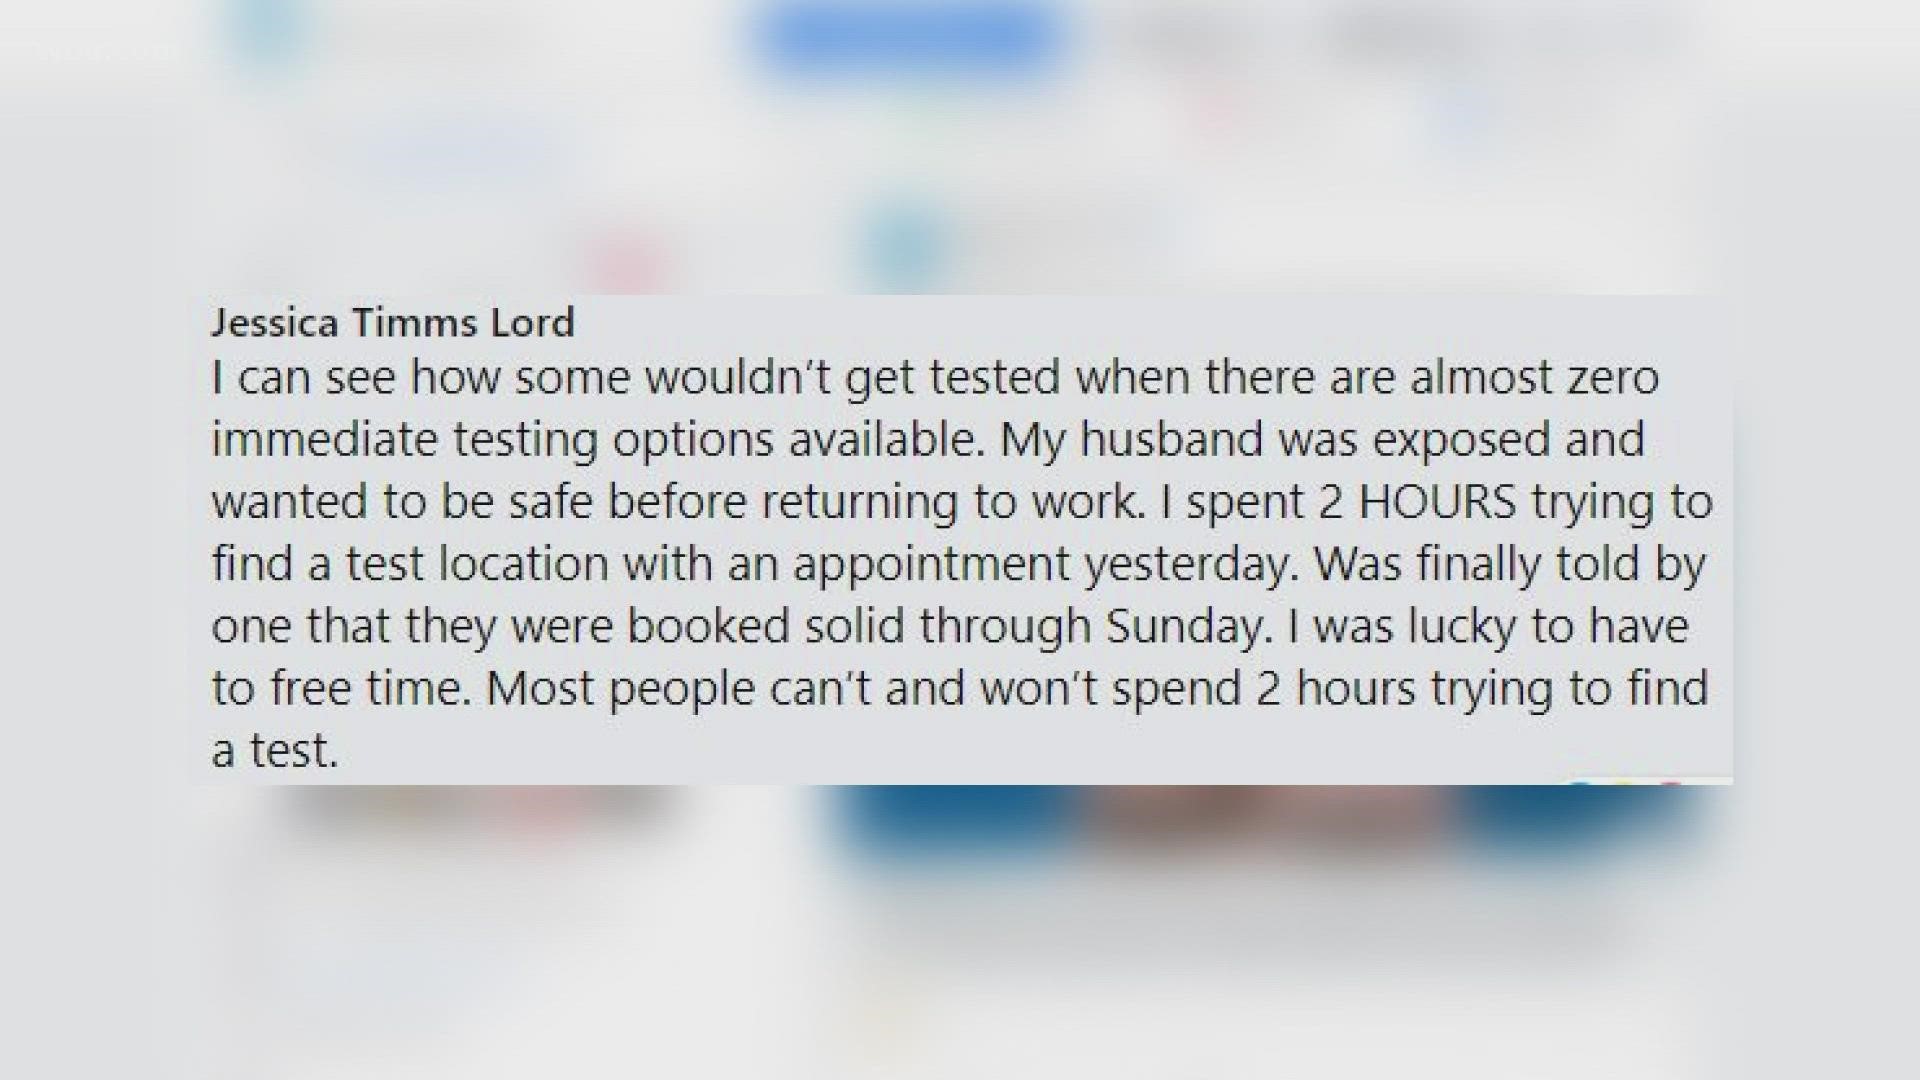 Some people have reached out saying it's harder to get a COVID testing appointment, especially for rapid tests for those who need to go back to work or school.